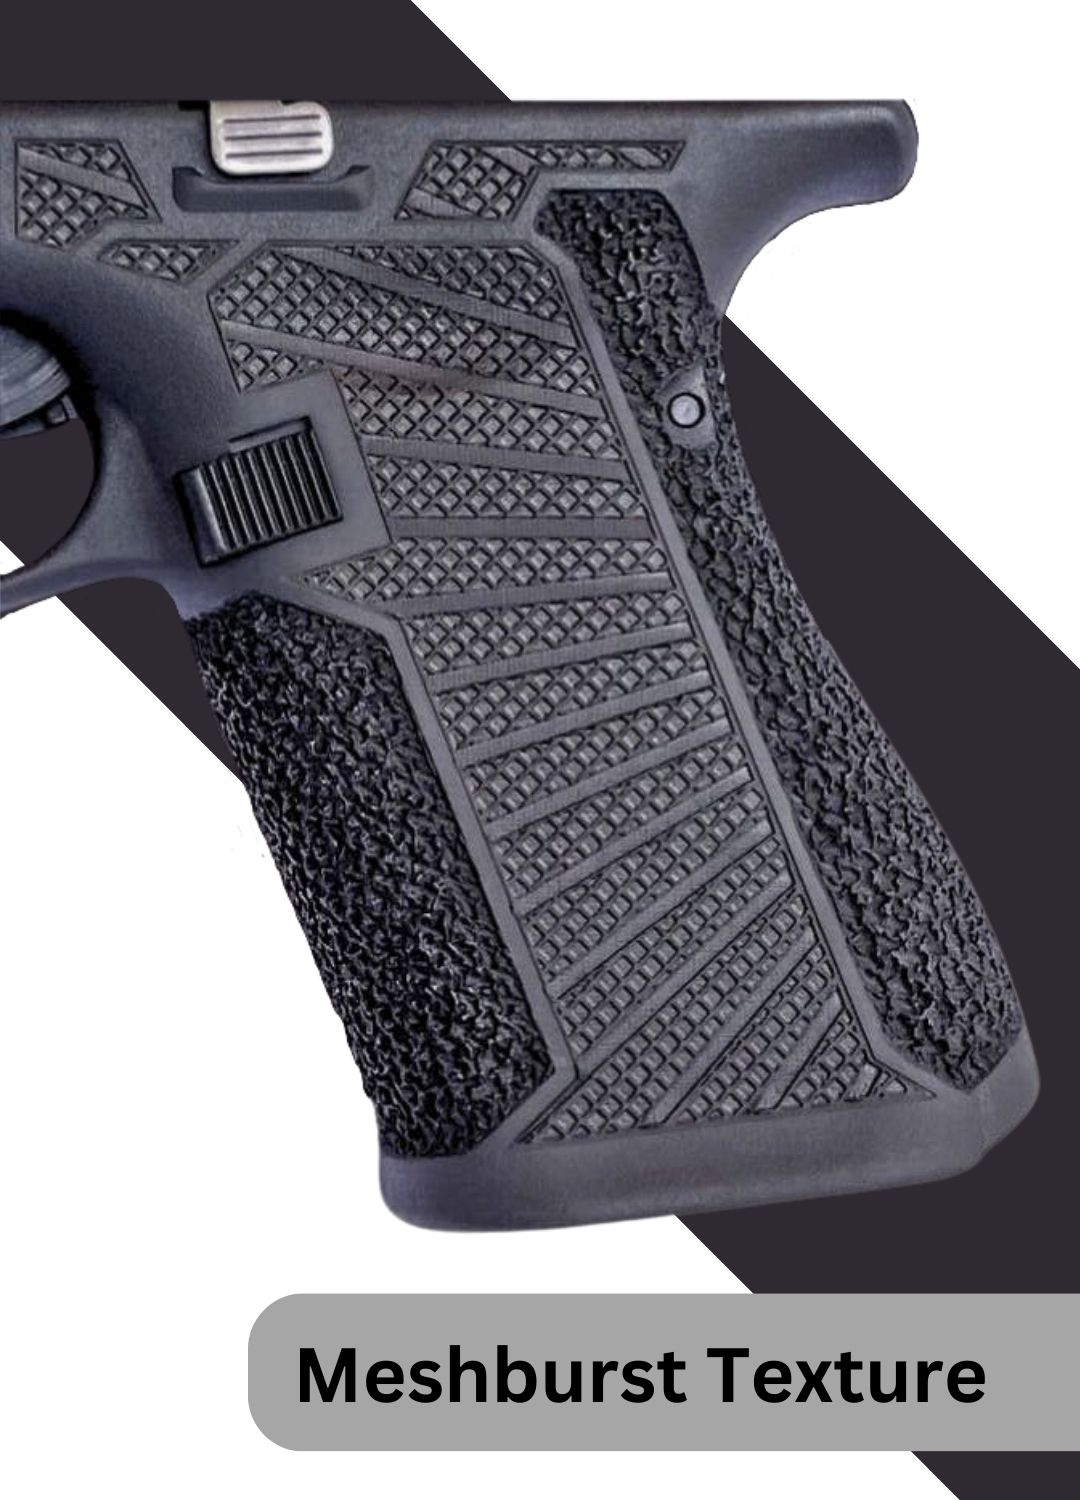 Get A Better Grip On Your Glock With DIY Stippling